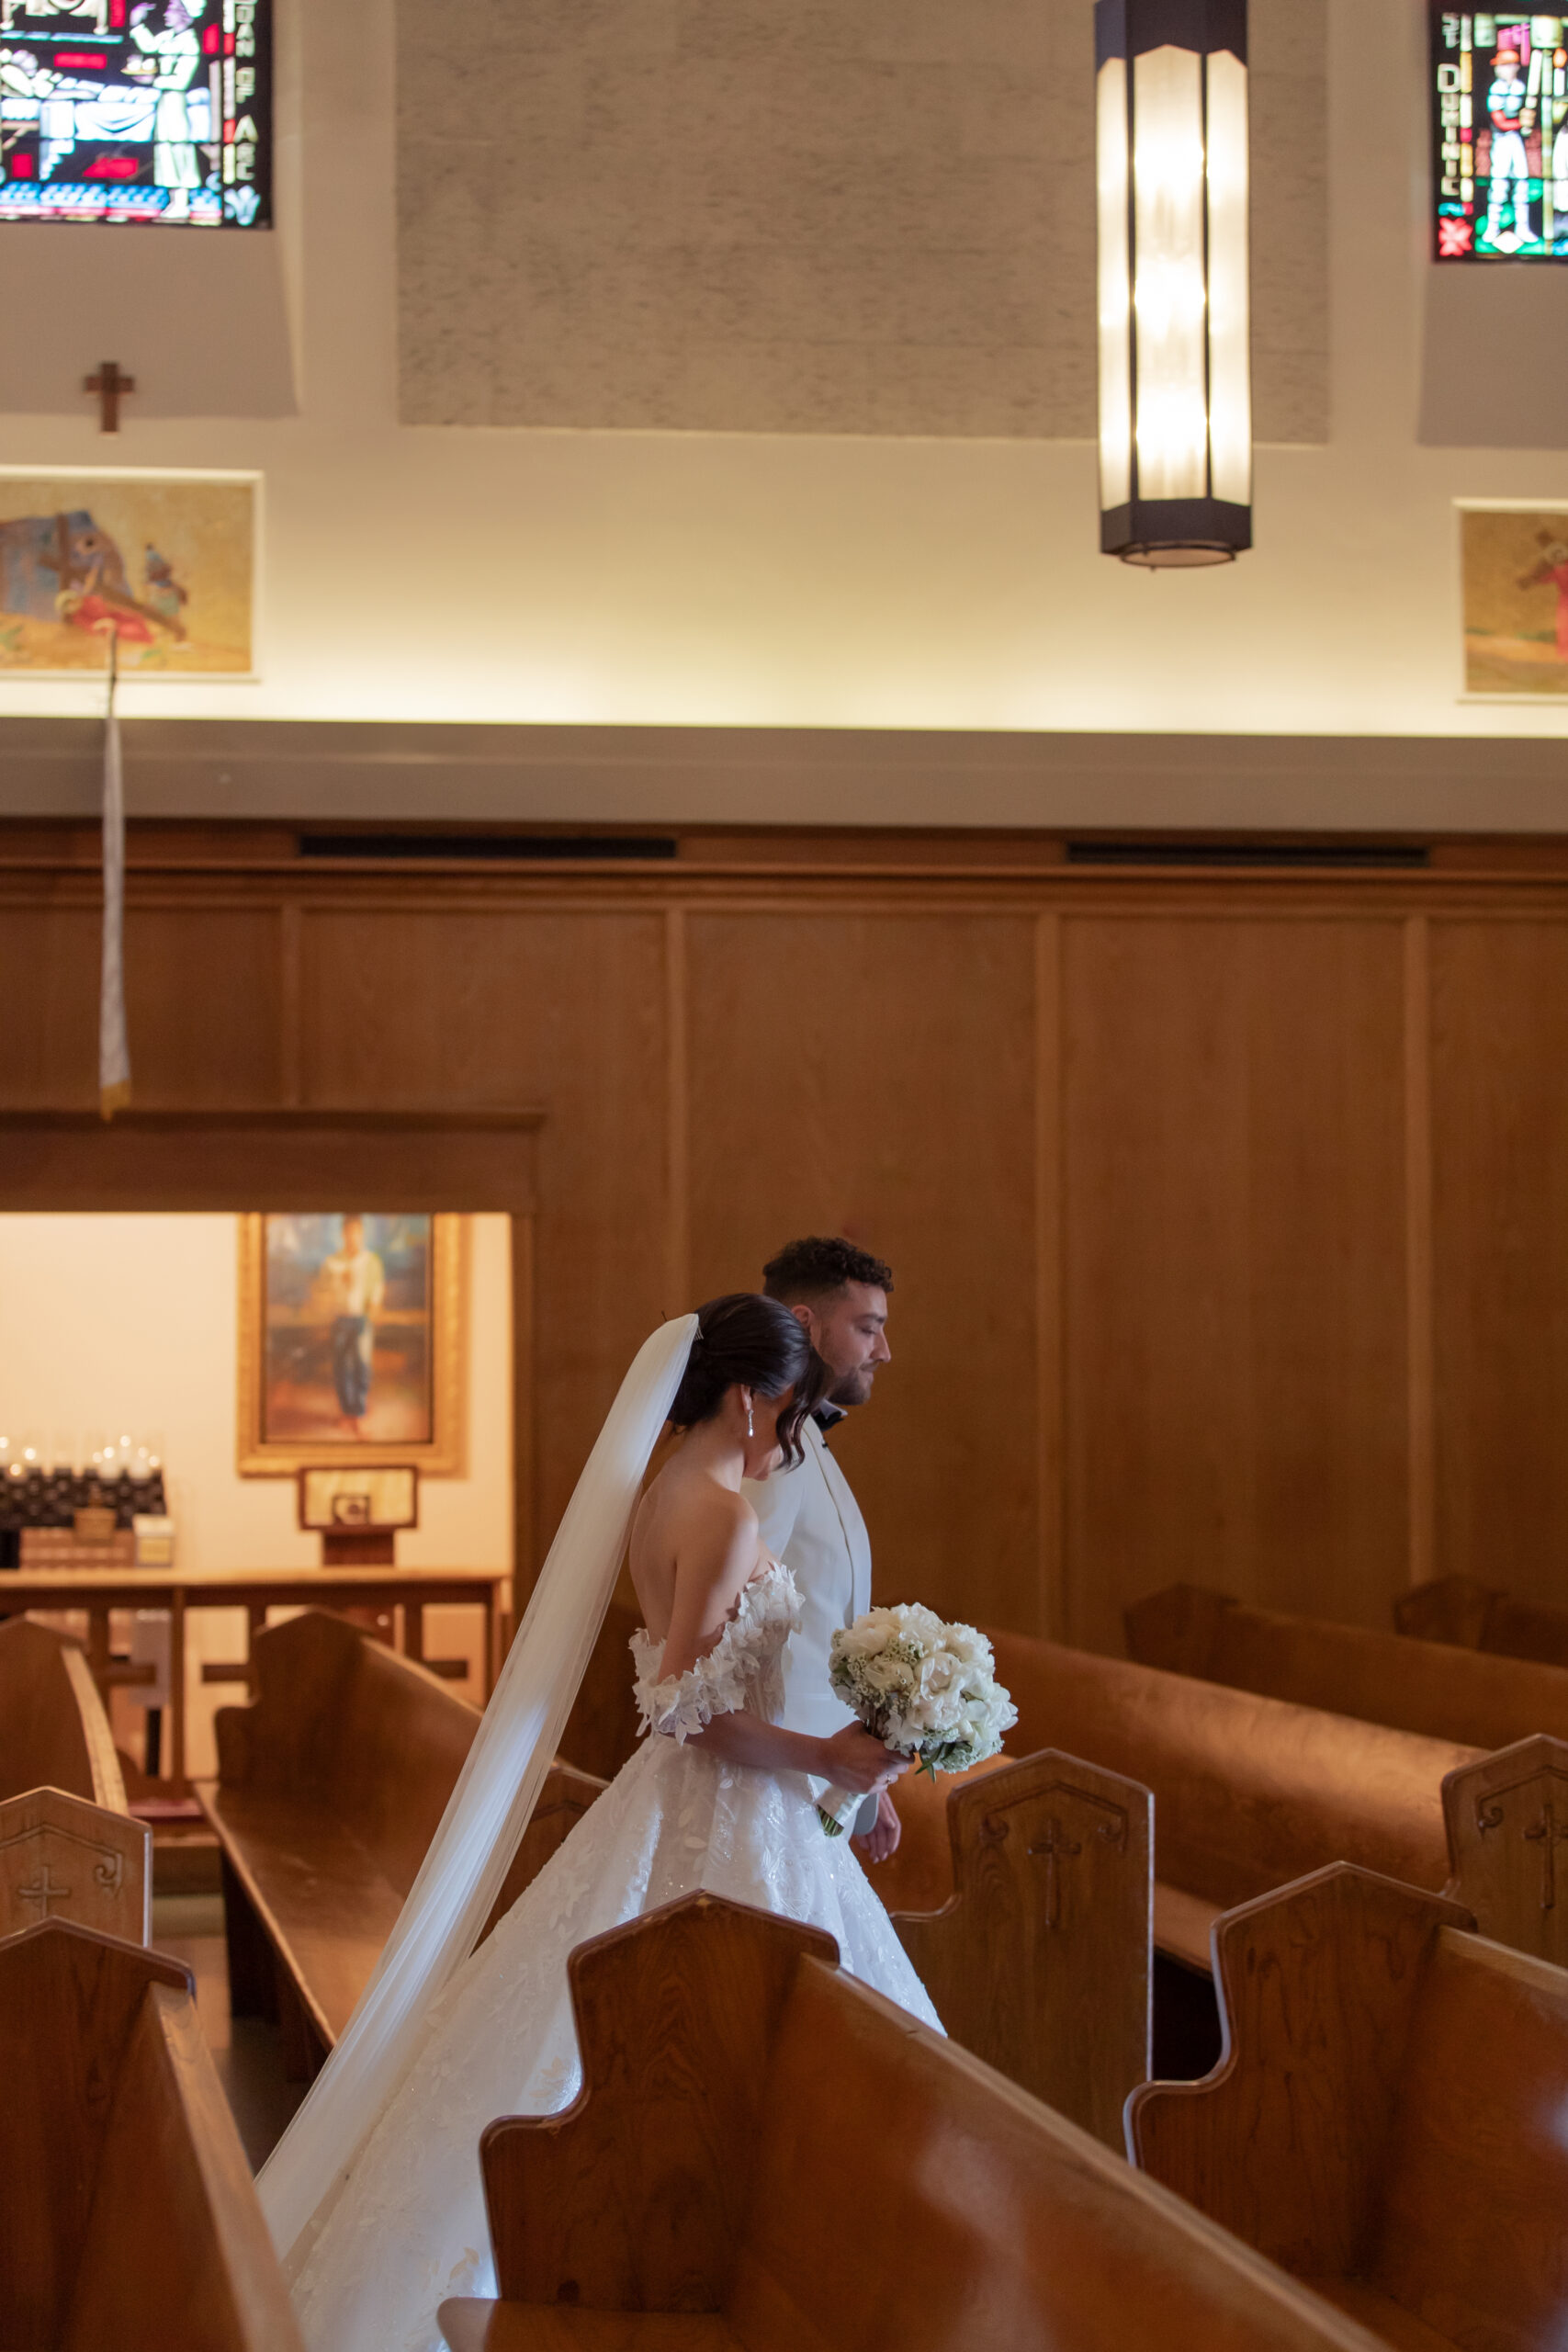 Bride and groom recessional at Saint Emydius church in Los Angeles.